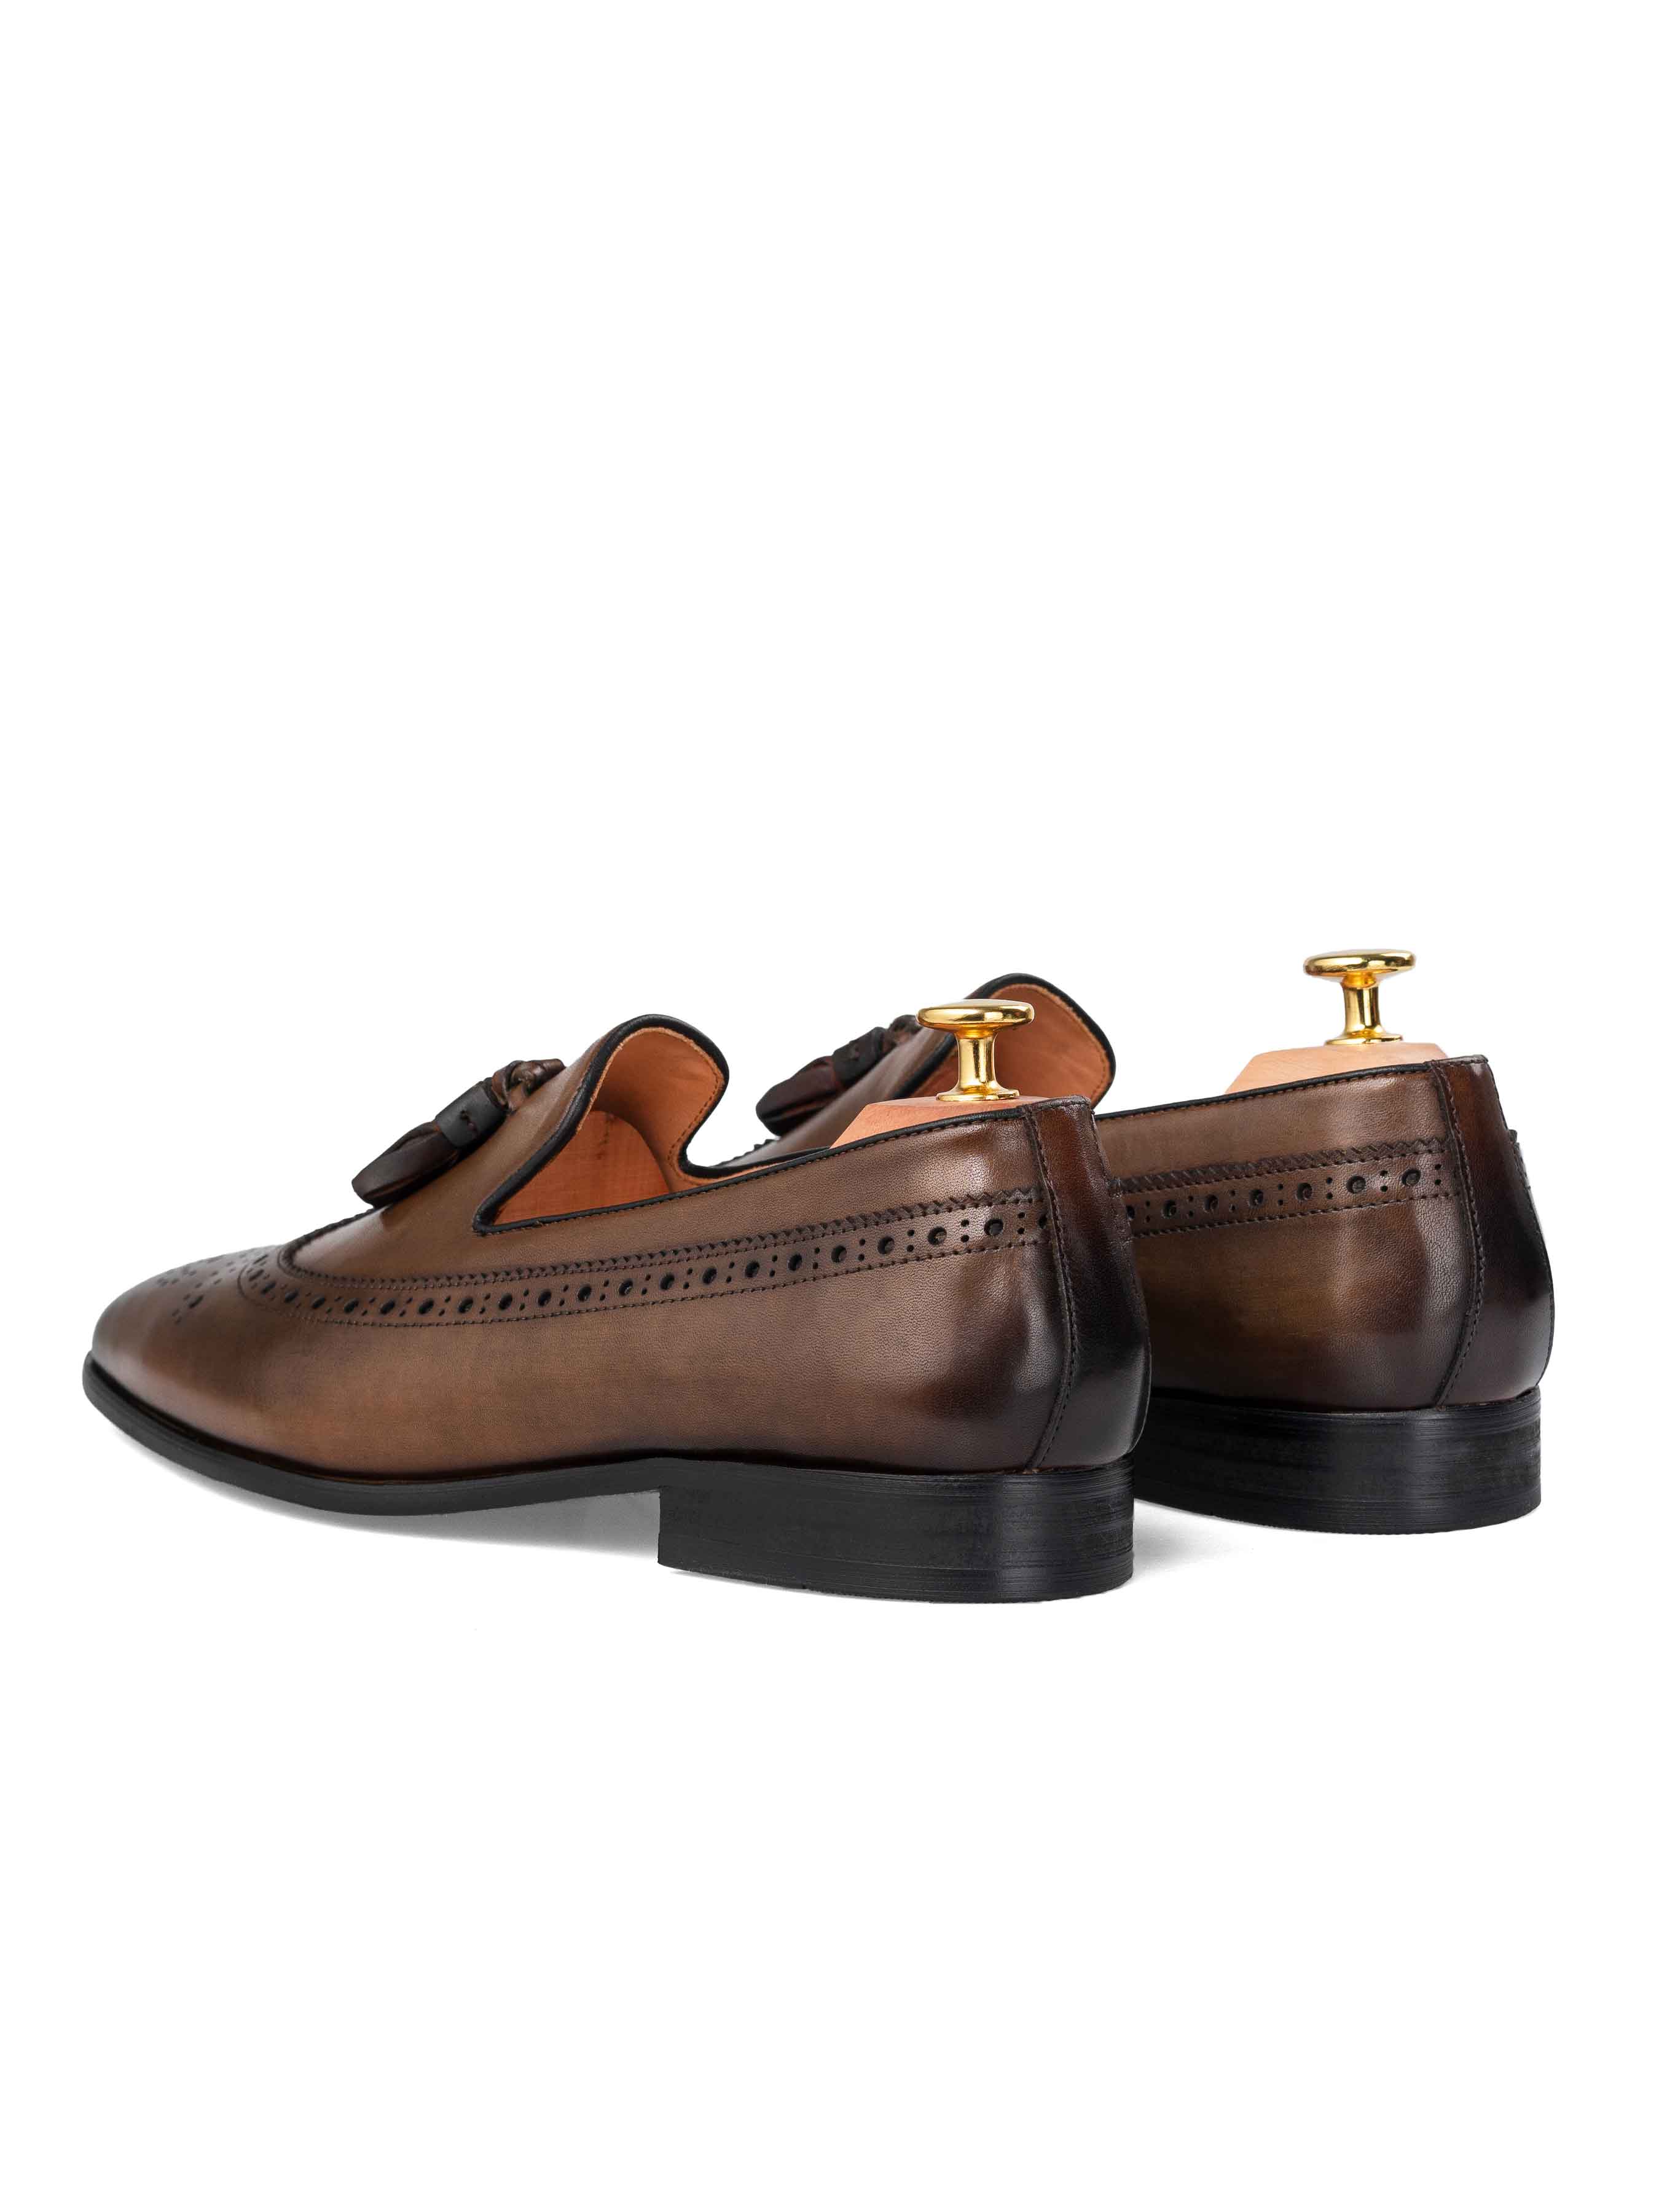 Loafer Slipper Longwing Brogue - Khakis with Tassel (Hand Painted Patina)